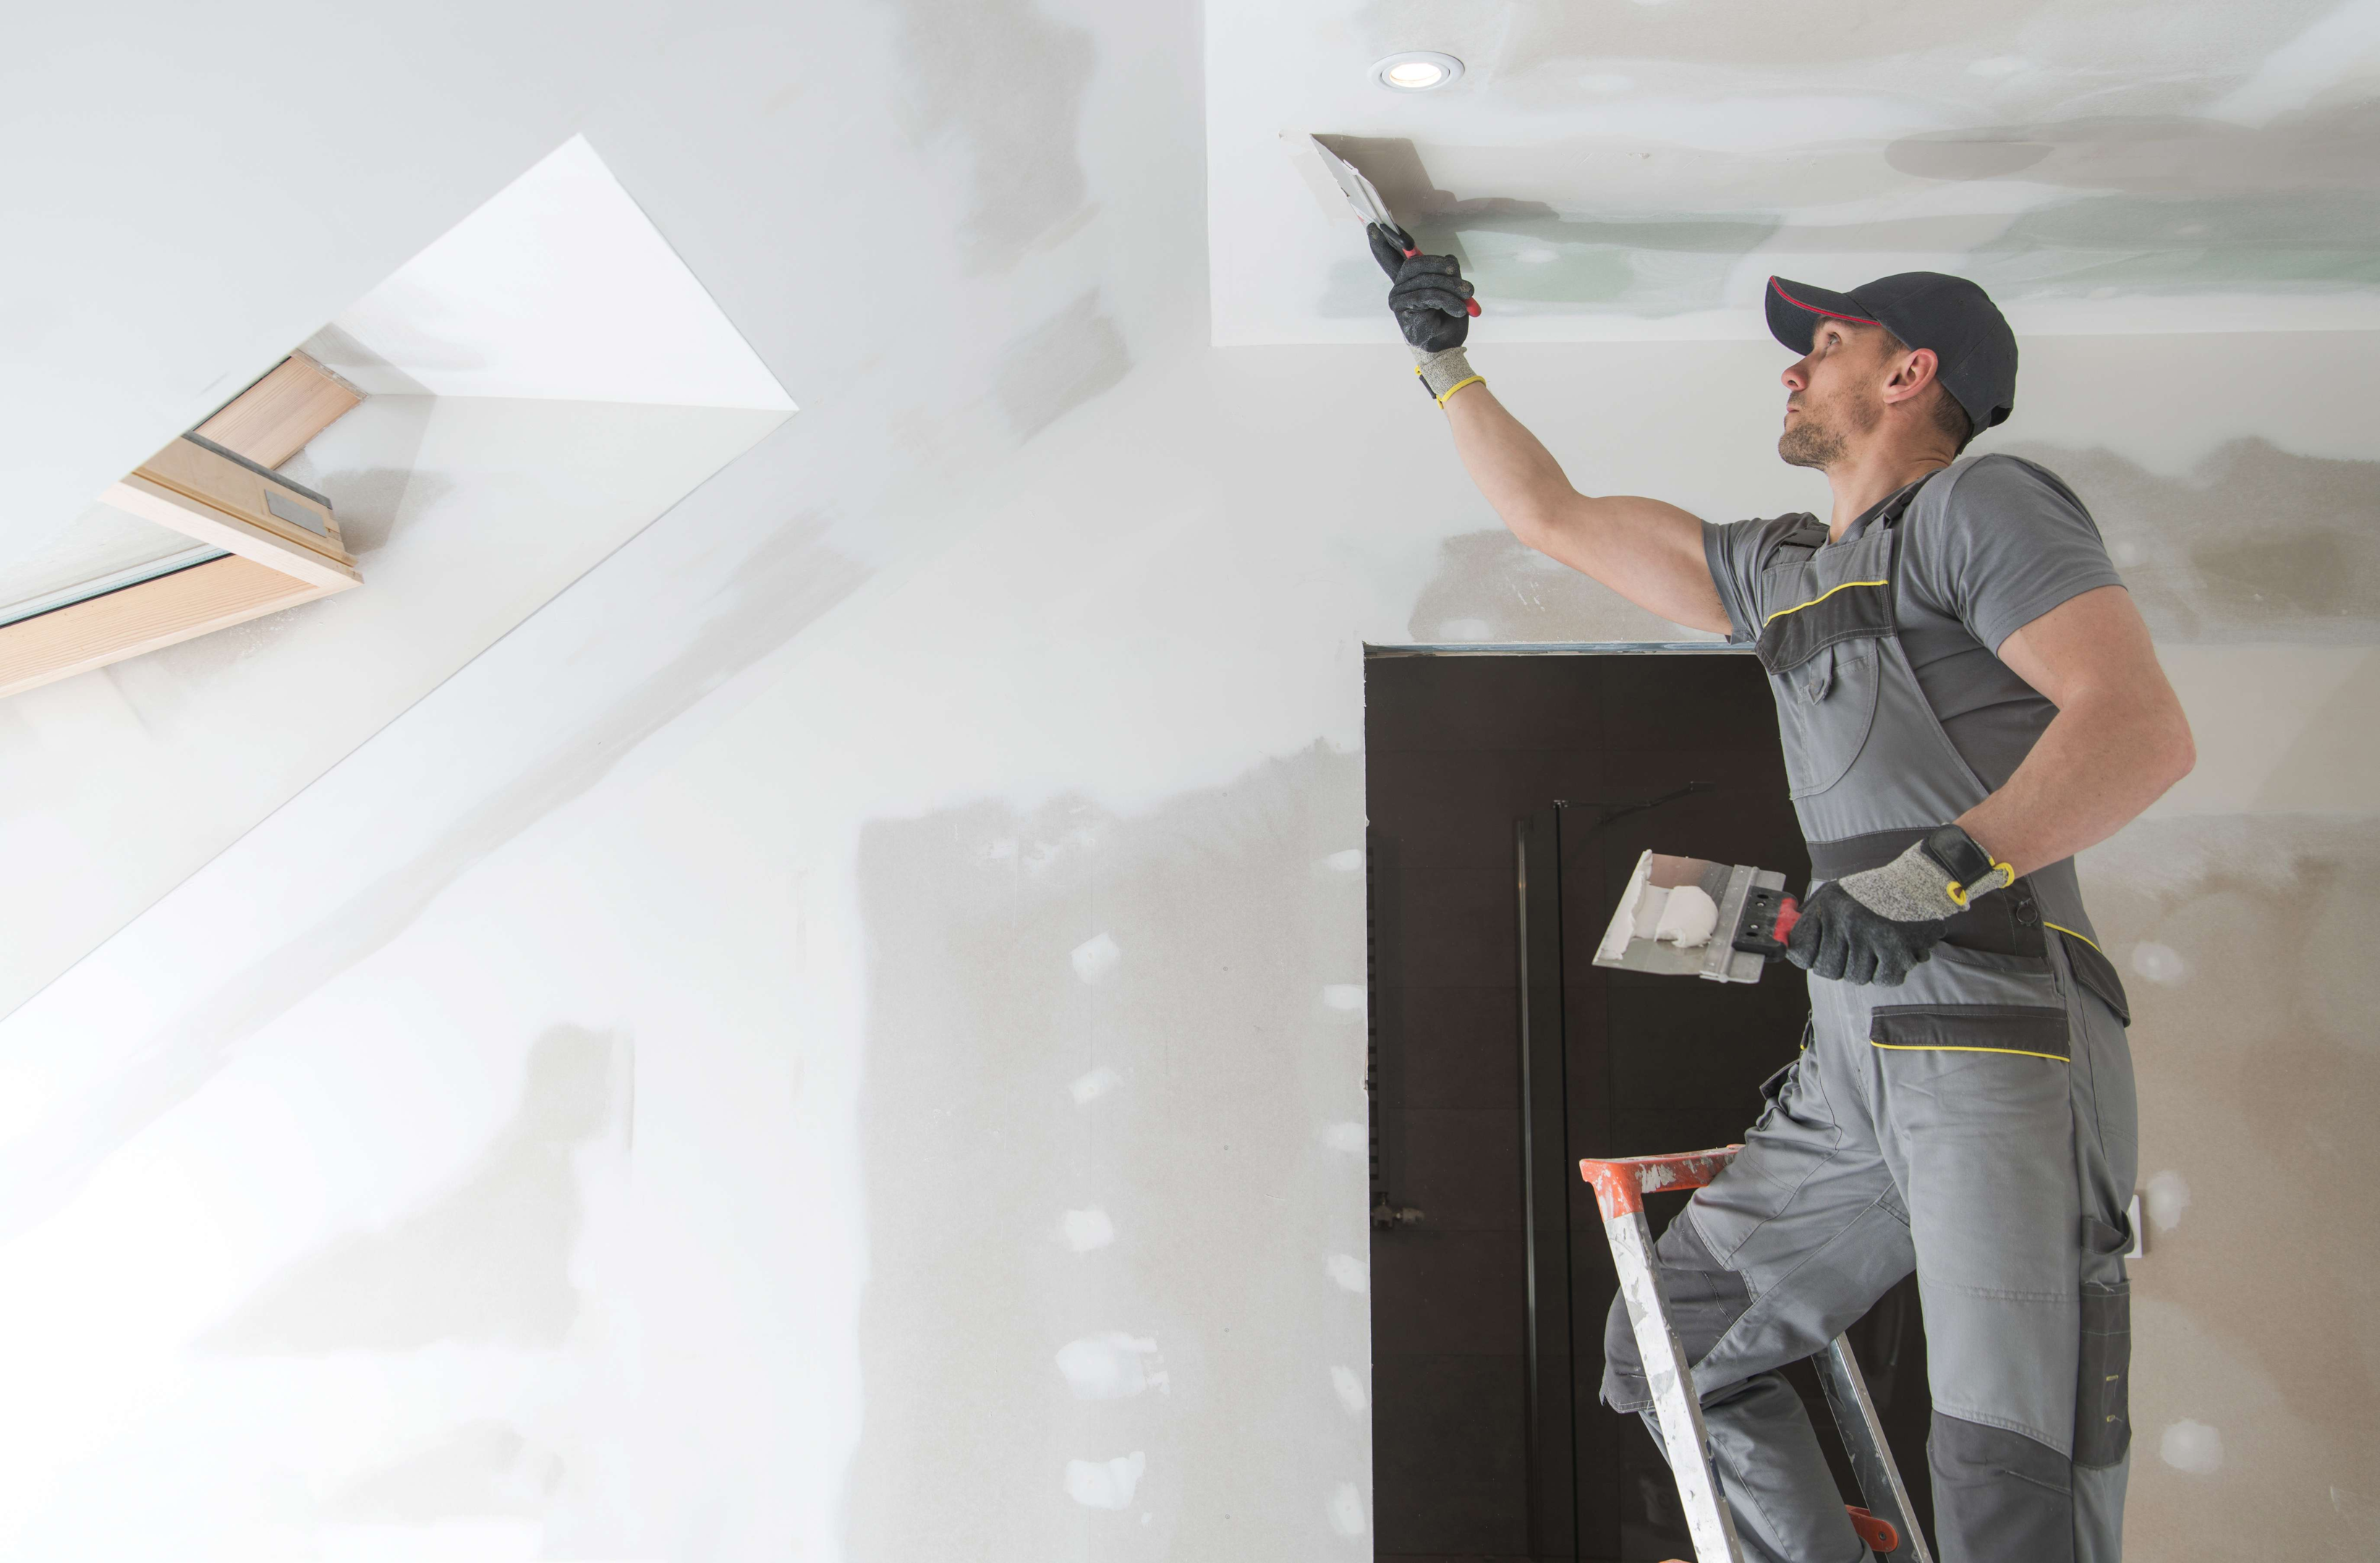 when remodeling a house what comes first - dry wall